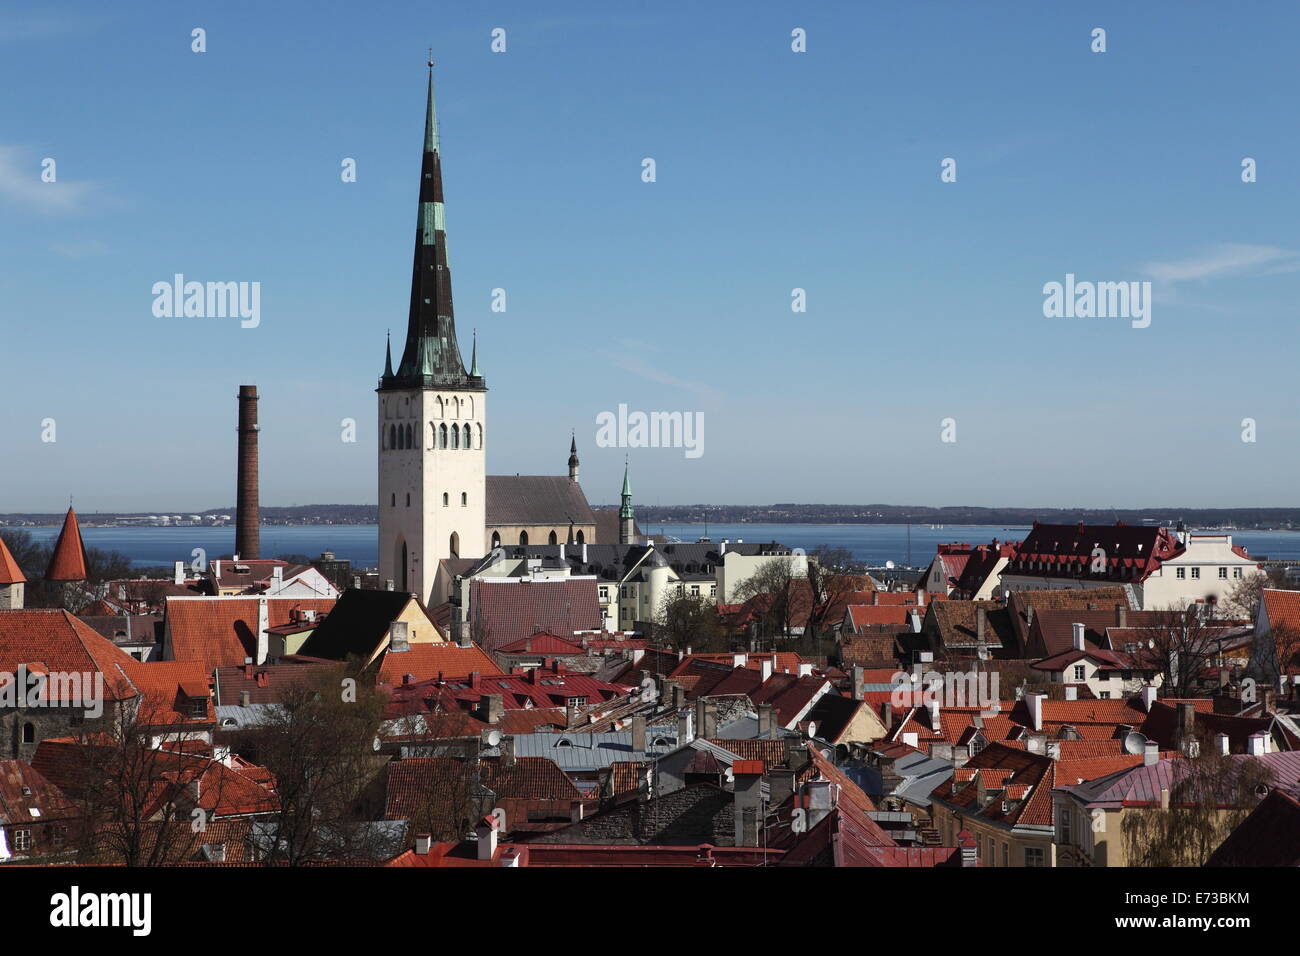 The spire of St Olaf's Church on the city skyline of Tallinn, Estonia, by the Gulf of Finland Stock Photo